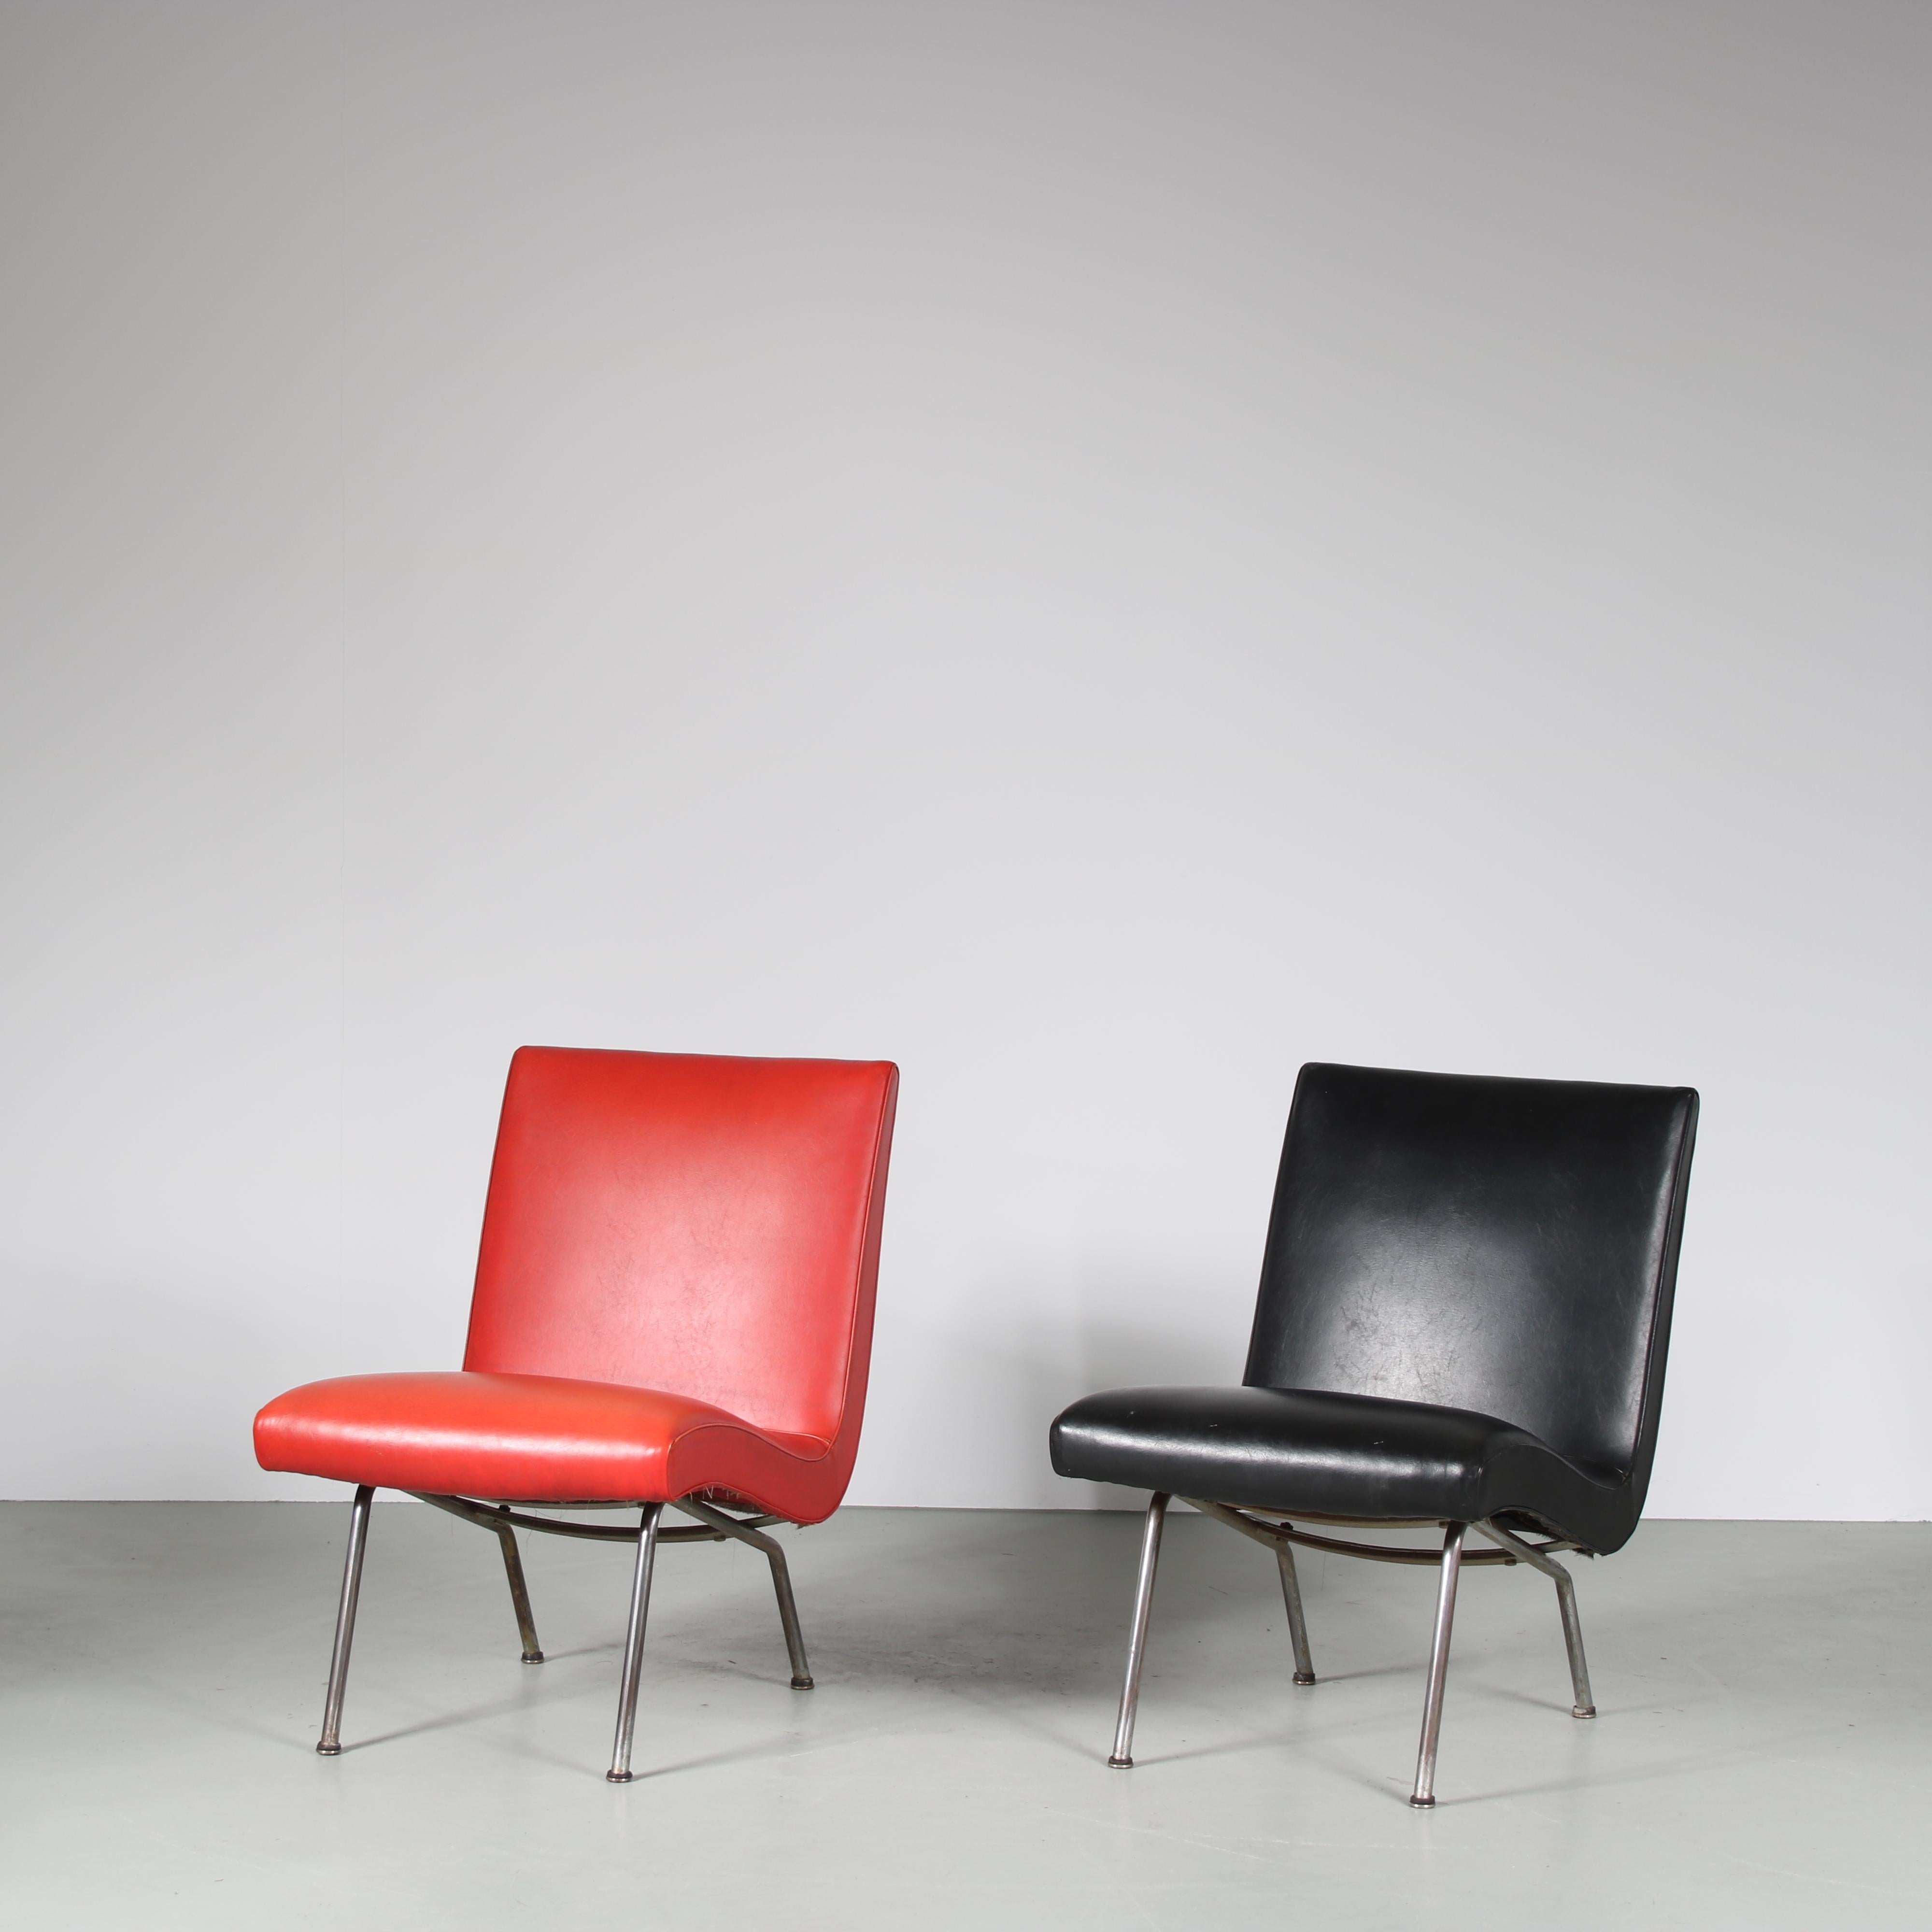 A rare pair of “Vostra” chairs designed by Walter Knoll, manufactured by Knoll in Germany around 1947.

A highly recognizable chair after Jens Risom’s original design, redefined by the Walter Knoll Team. Designed to create a casual, modern style